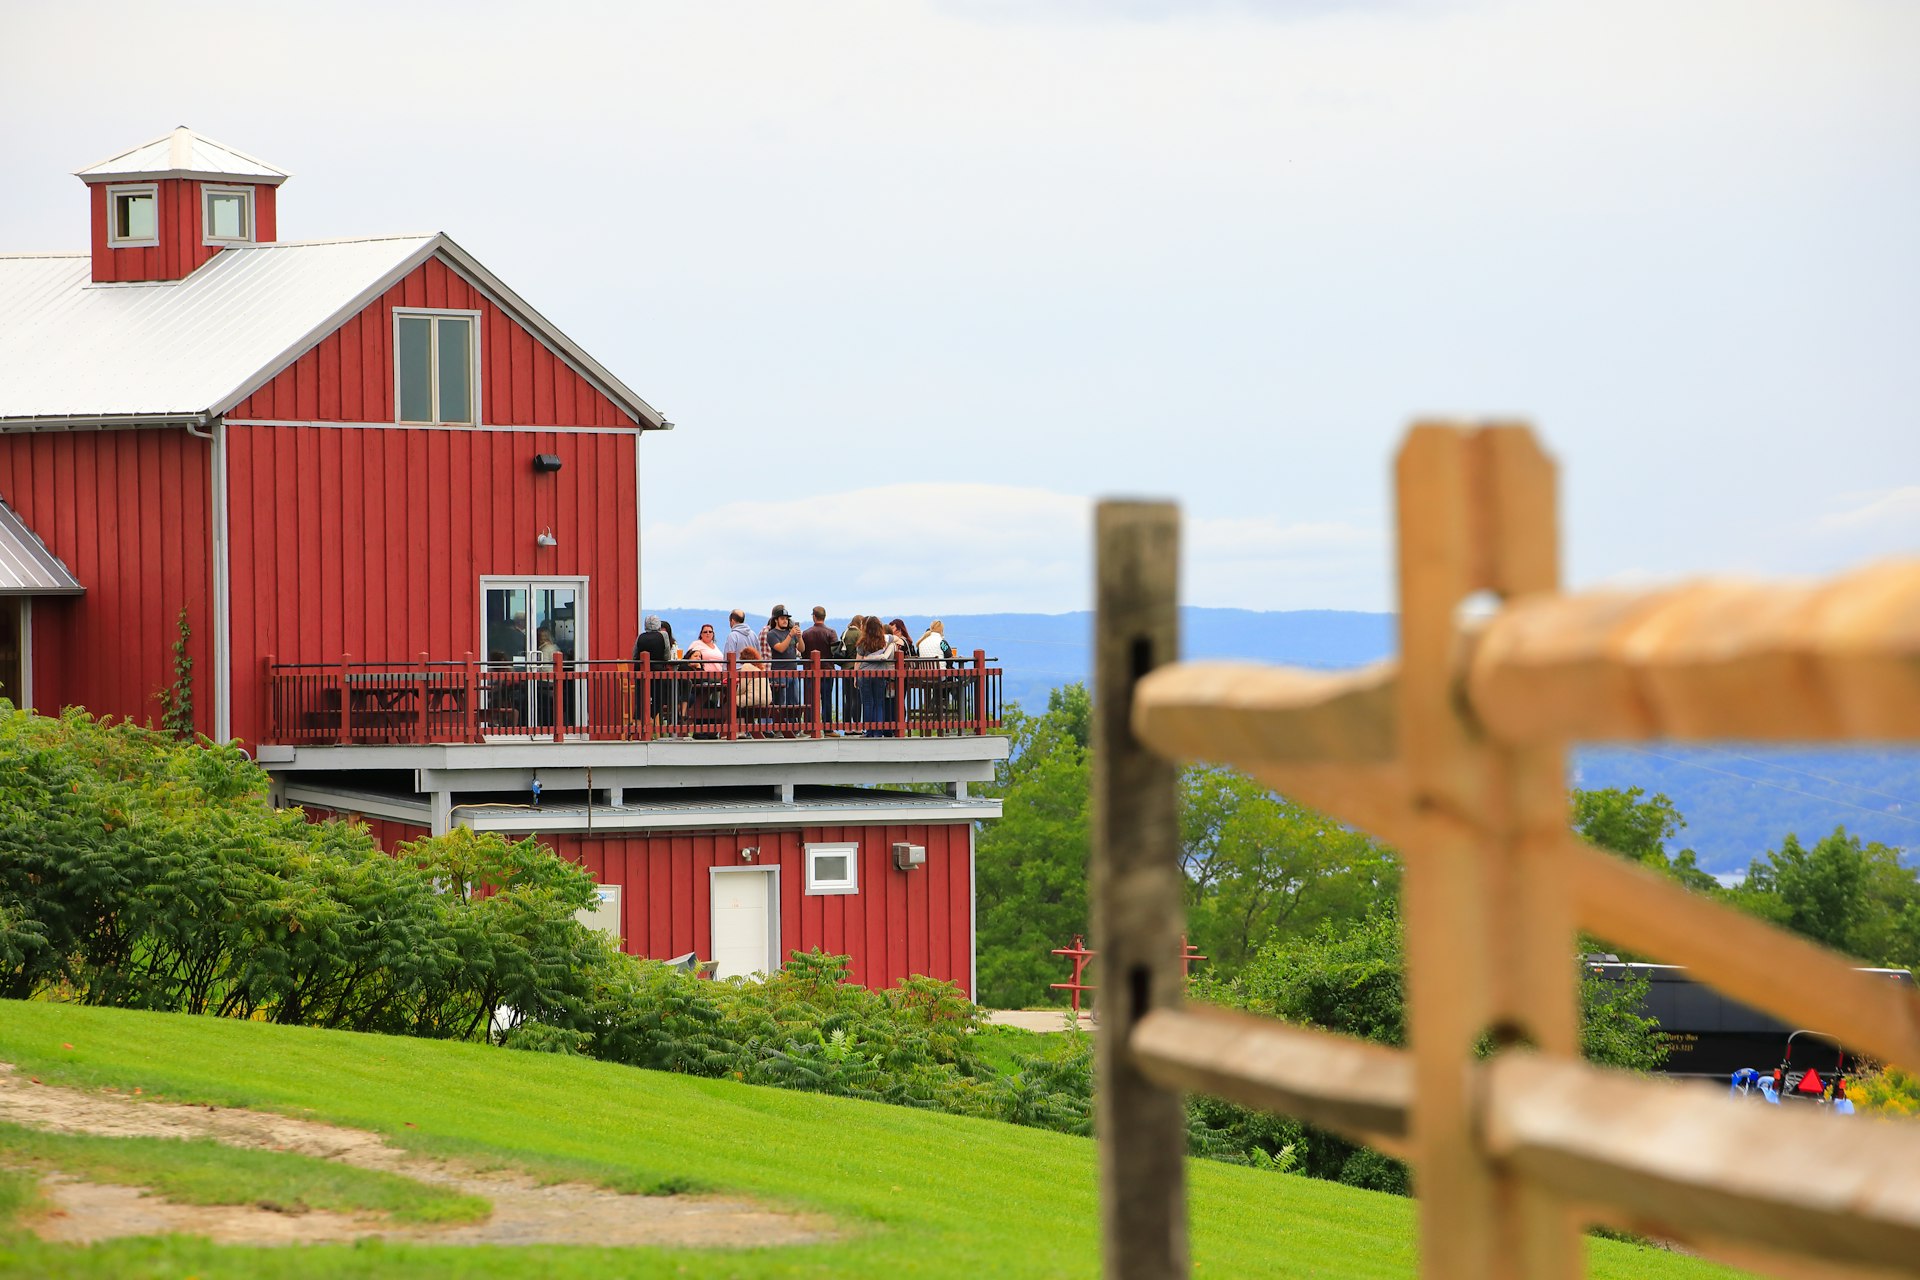 A wine tasting barn by the Seneca Lake on the Finger Lakes Wine Trail